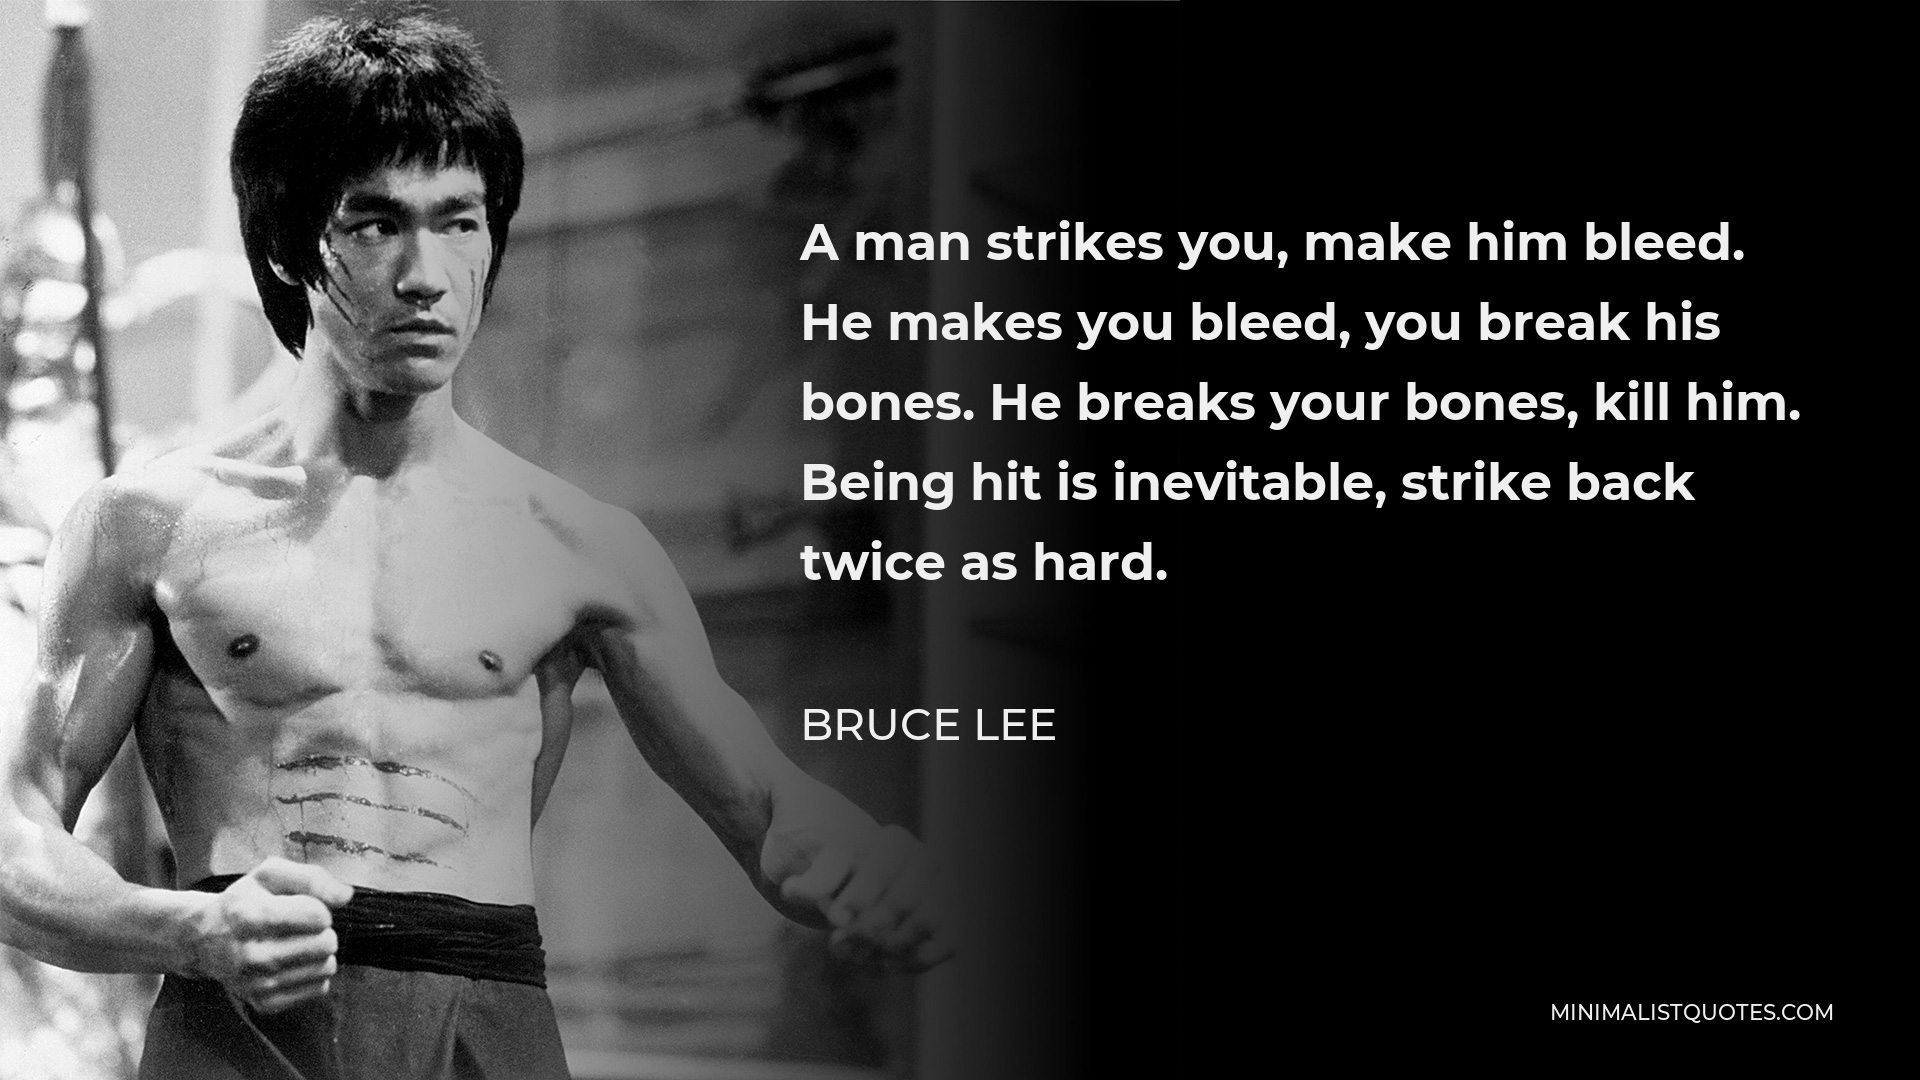 Bruce Lee Quote - A man strikes you, make him bleed. He makes you bleed, you break his bones. He breaks your bones, kill him. Being hit is inevitable, strike back twice as hard.